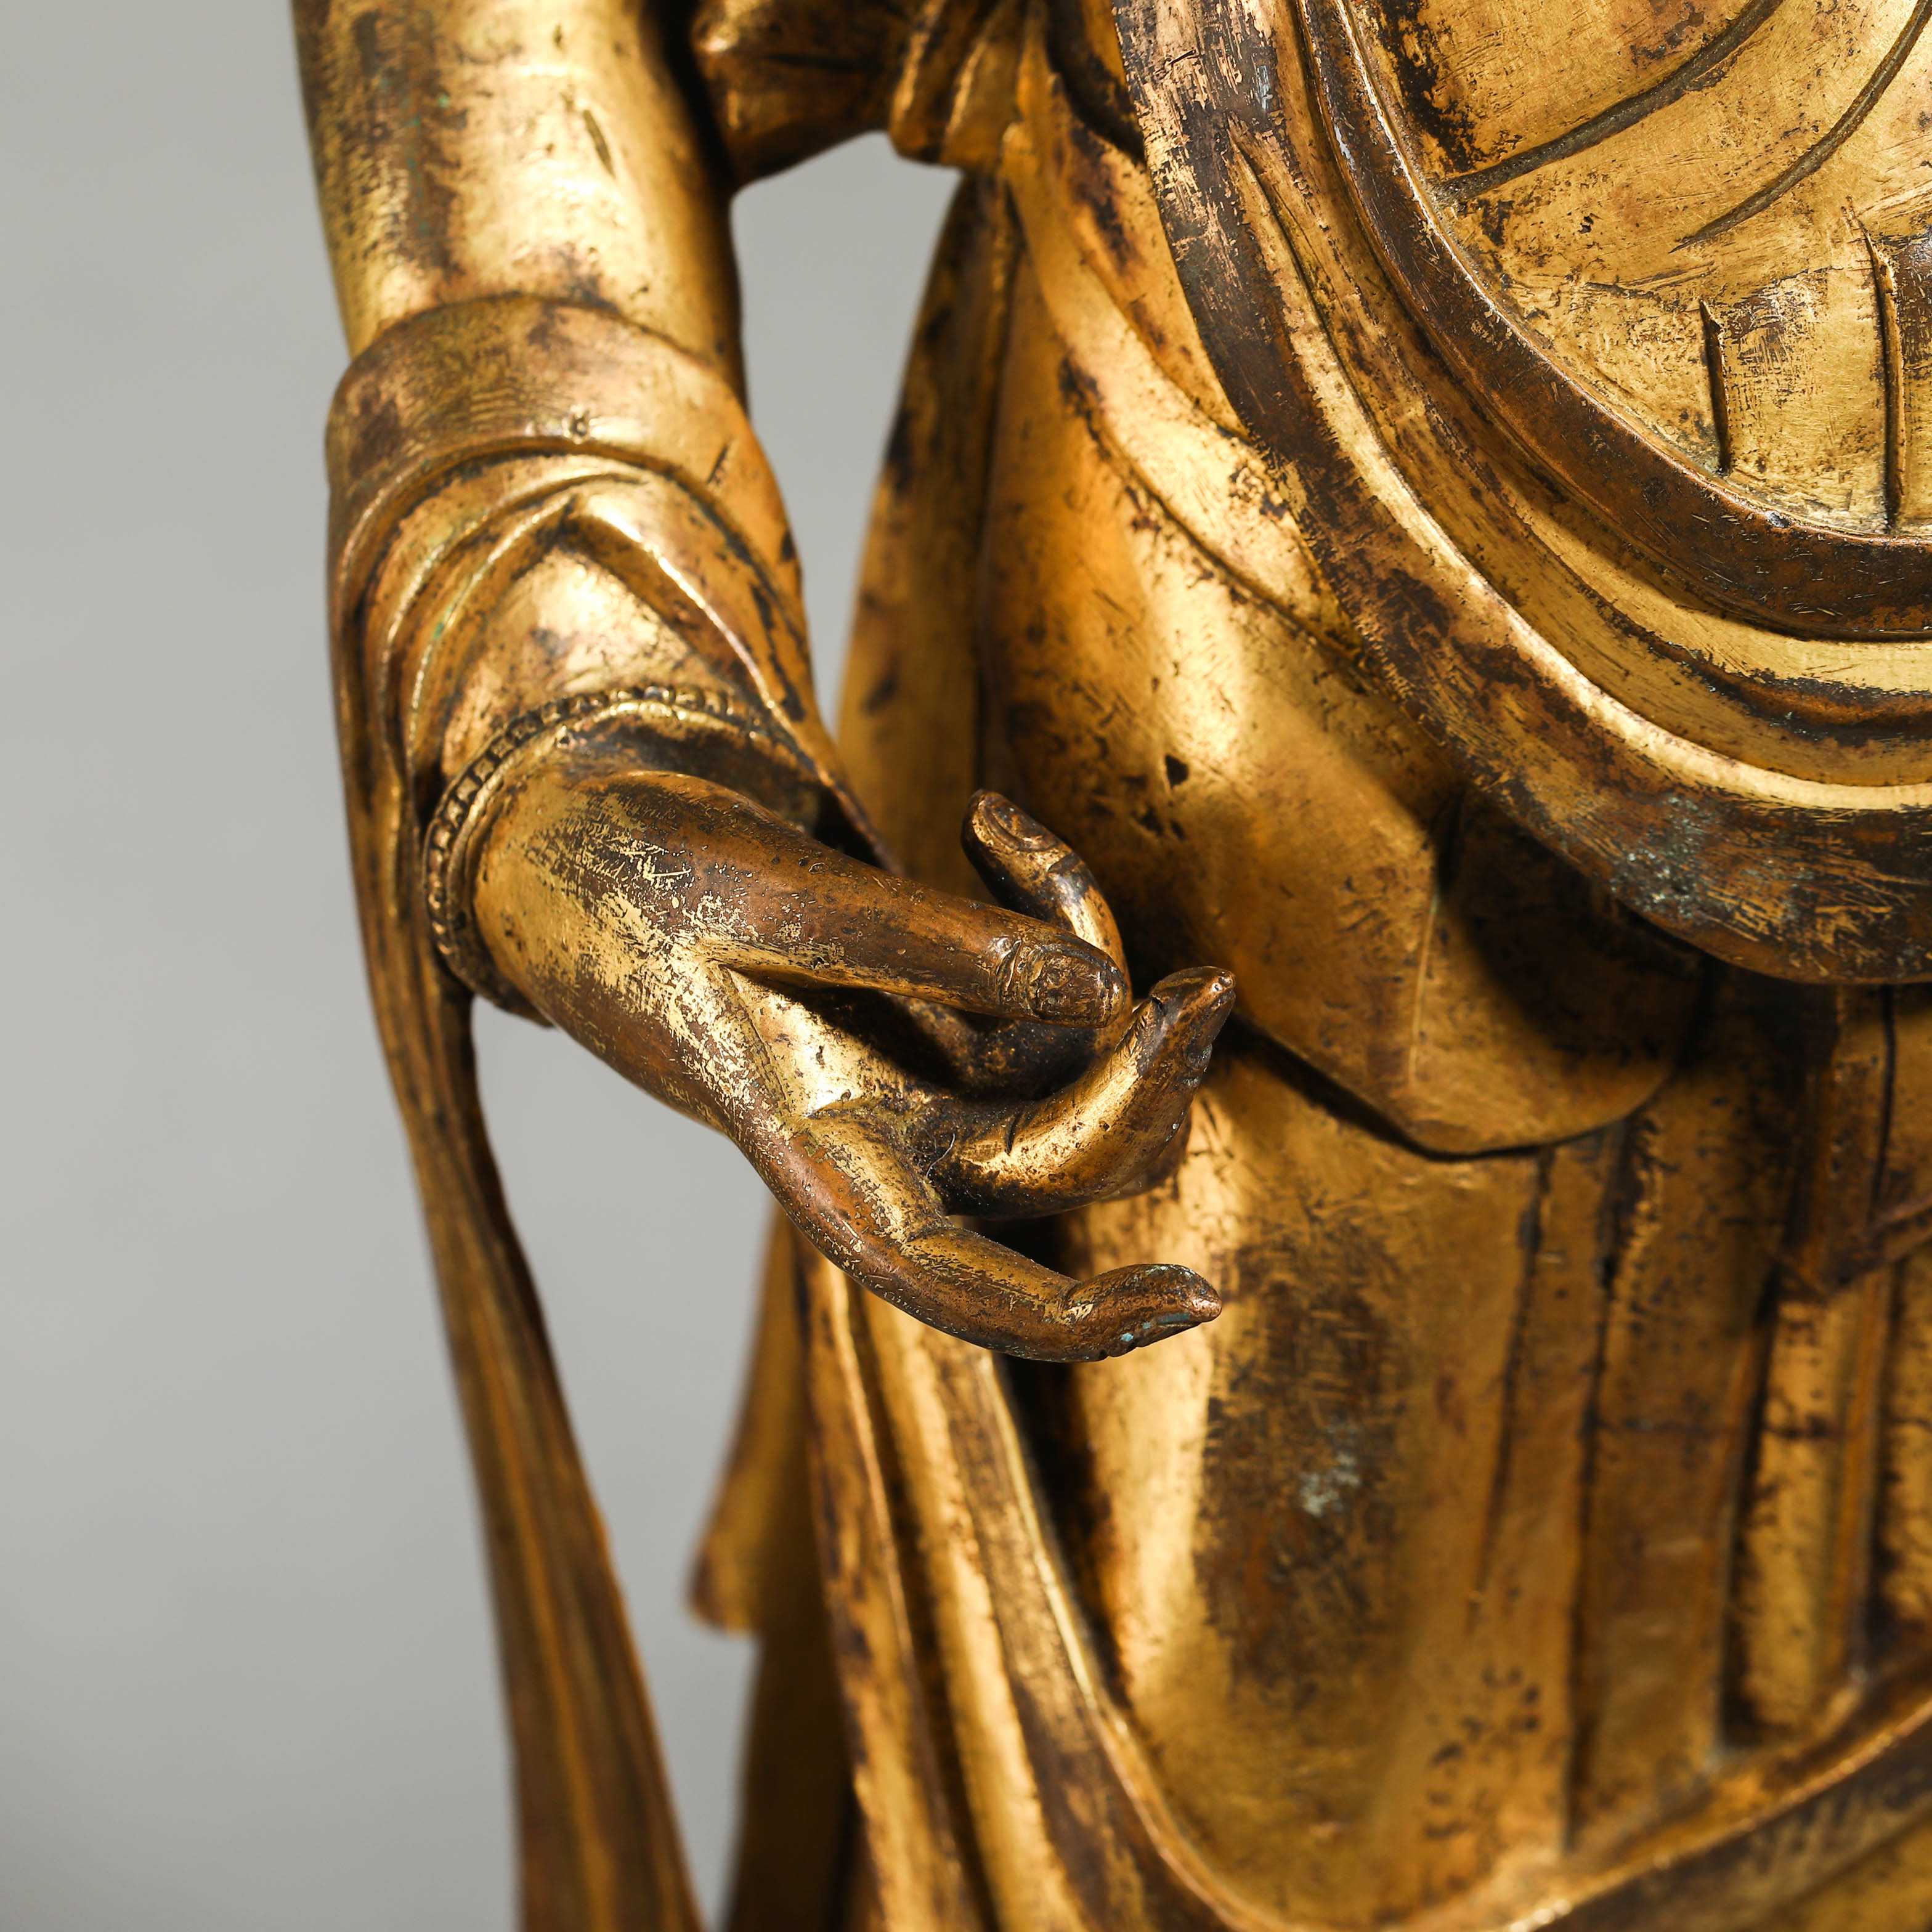 10th century gilded statue of Guanyin Buddha - Image 4 of 14